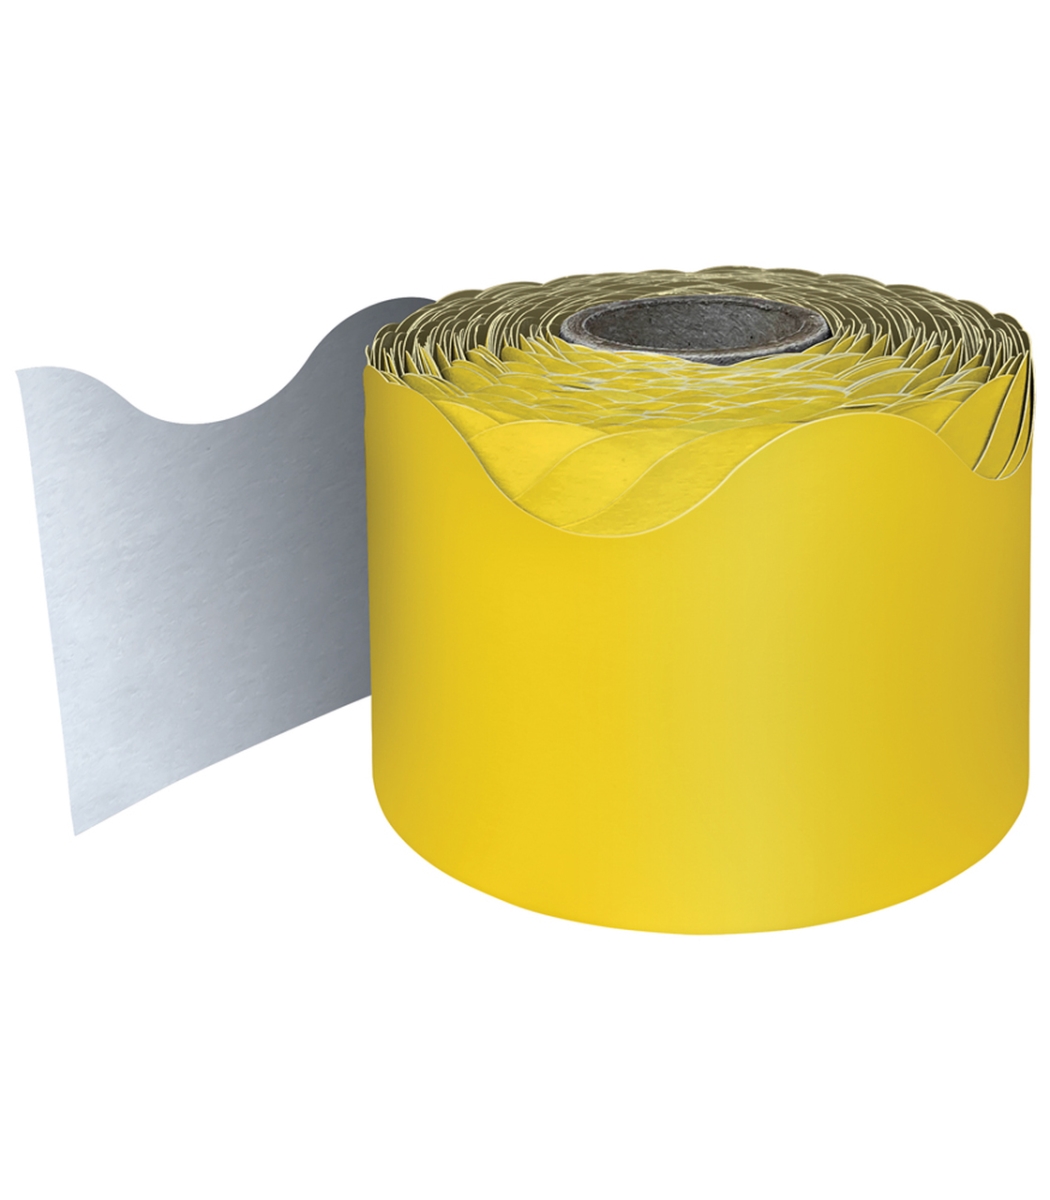 Picture of Carson Dellosa Education CD-108467-3 Rolled Scalloped Borders, Yellow - 3 Roll